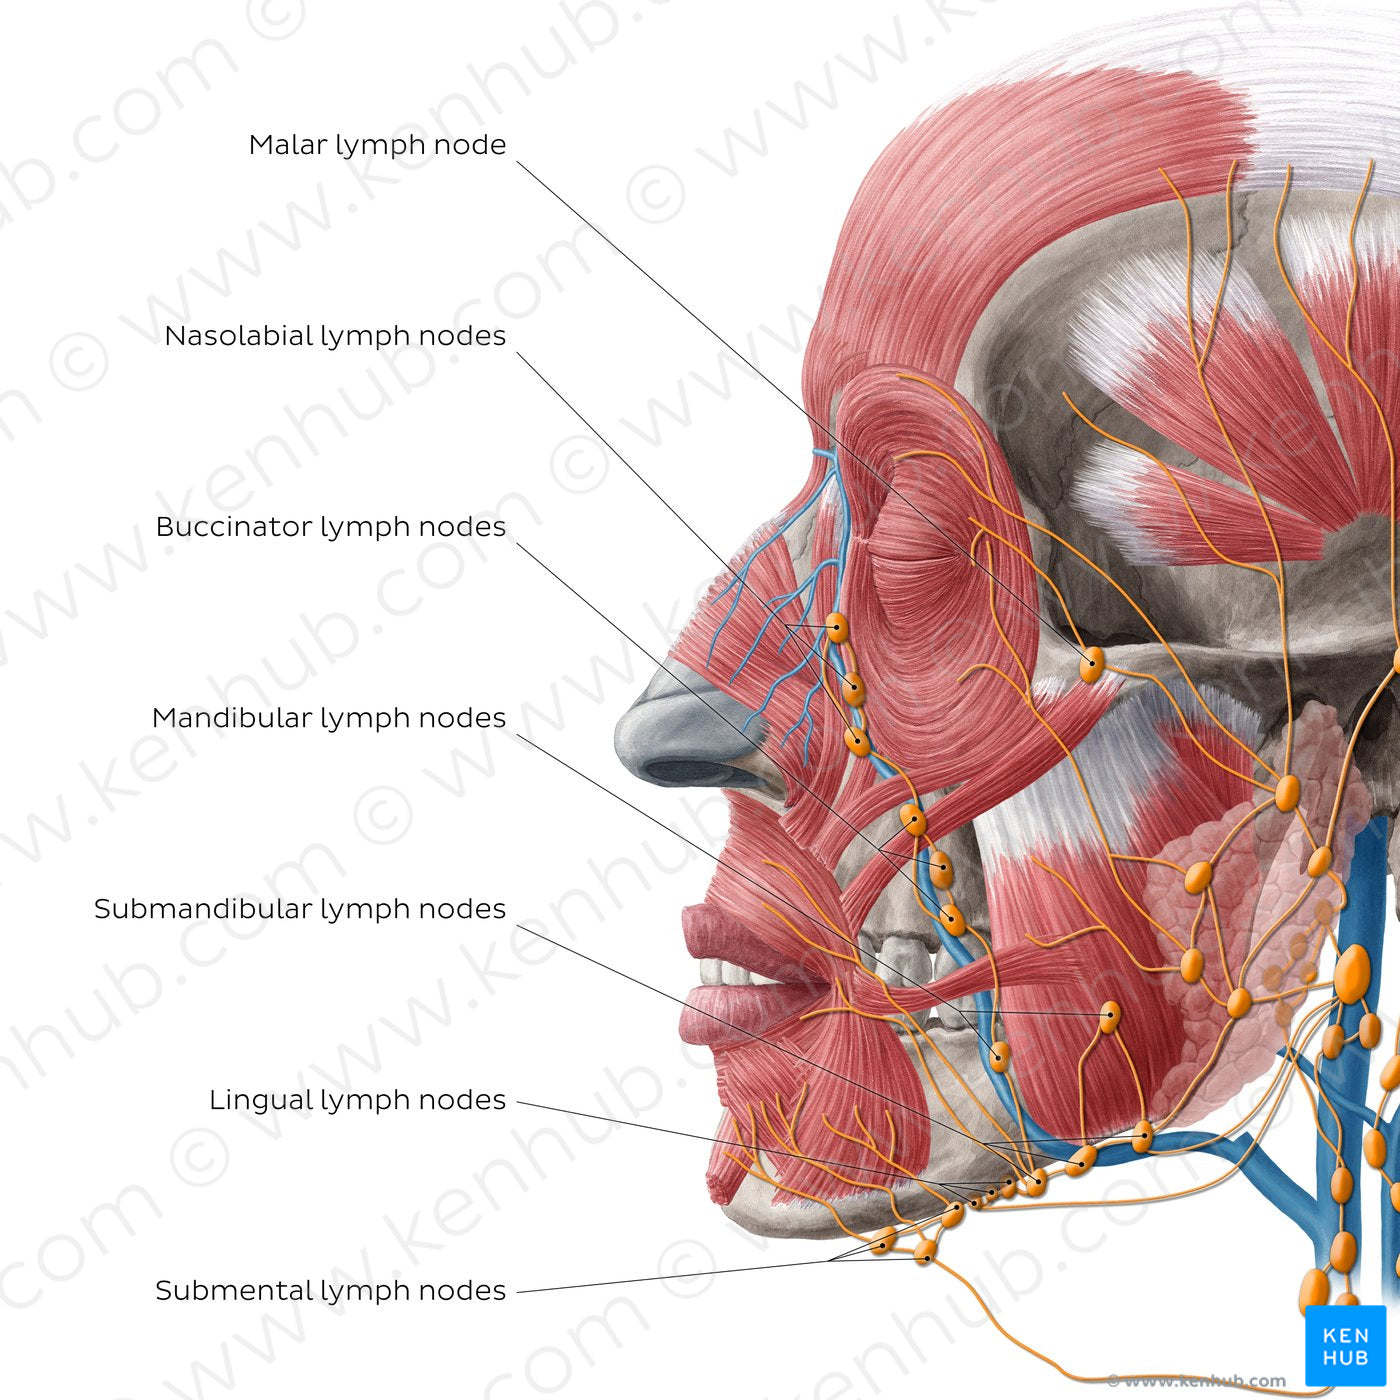 Lymphatics of the head (Lateral) (English)